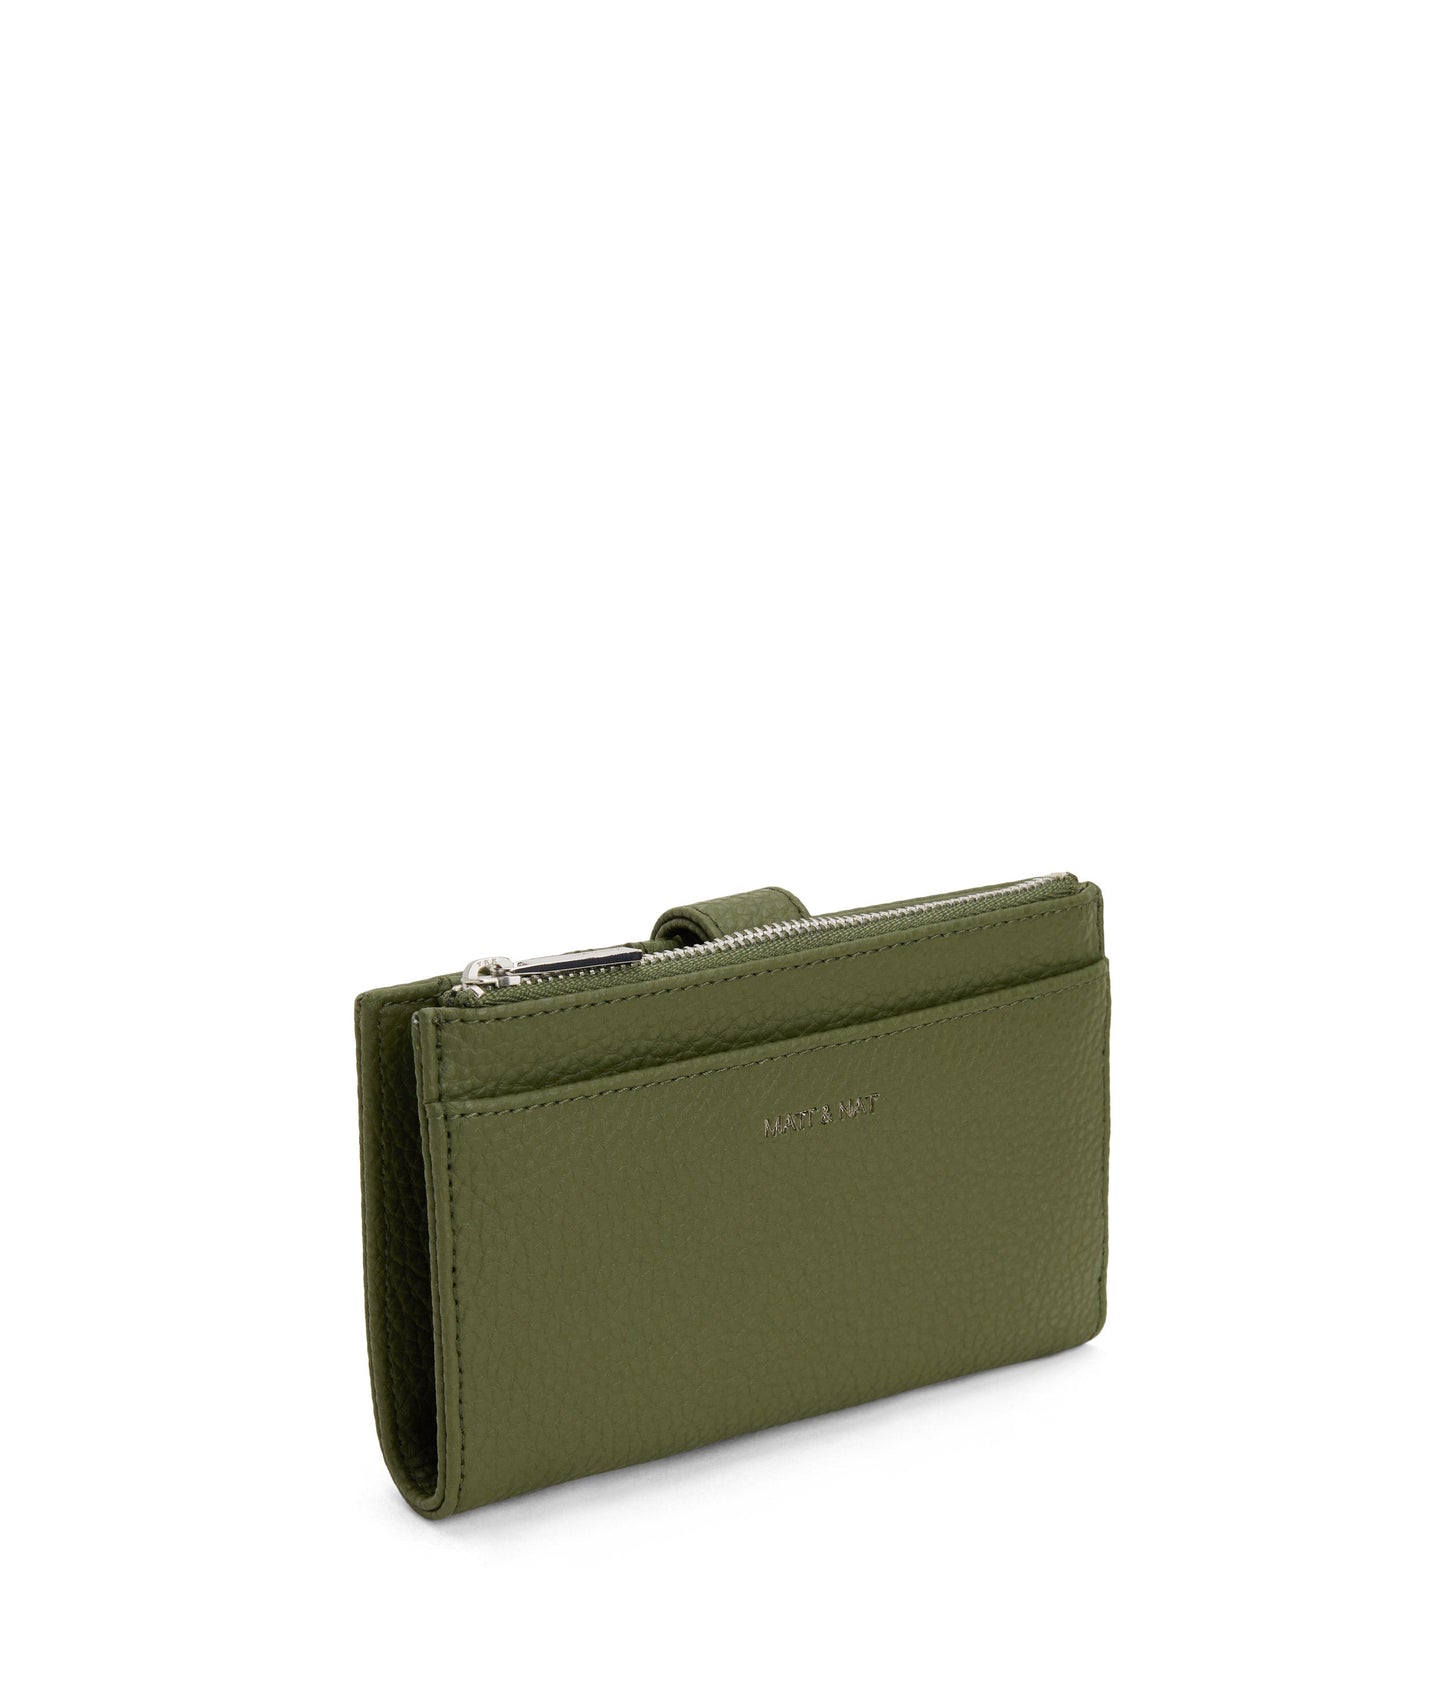 MOTIVSM Small Vegan Wallet - Purity | Color: Green - variant::meadow